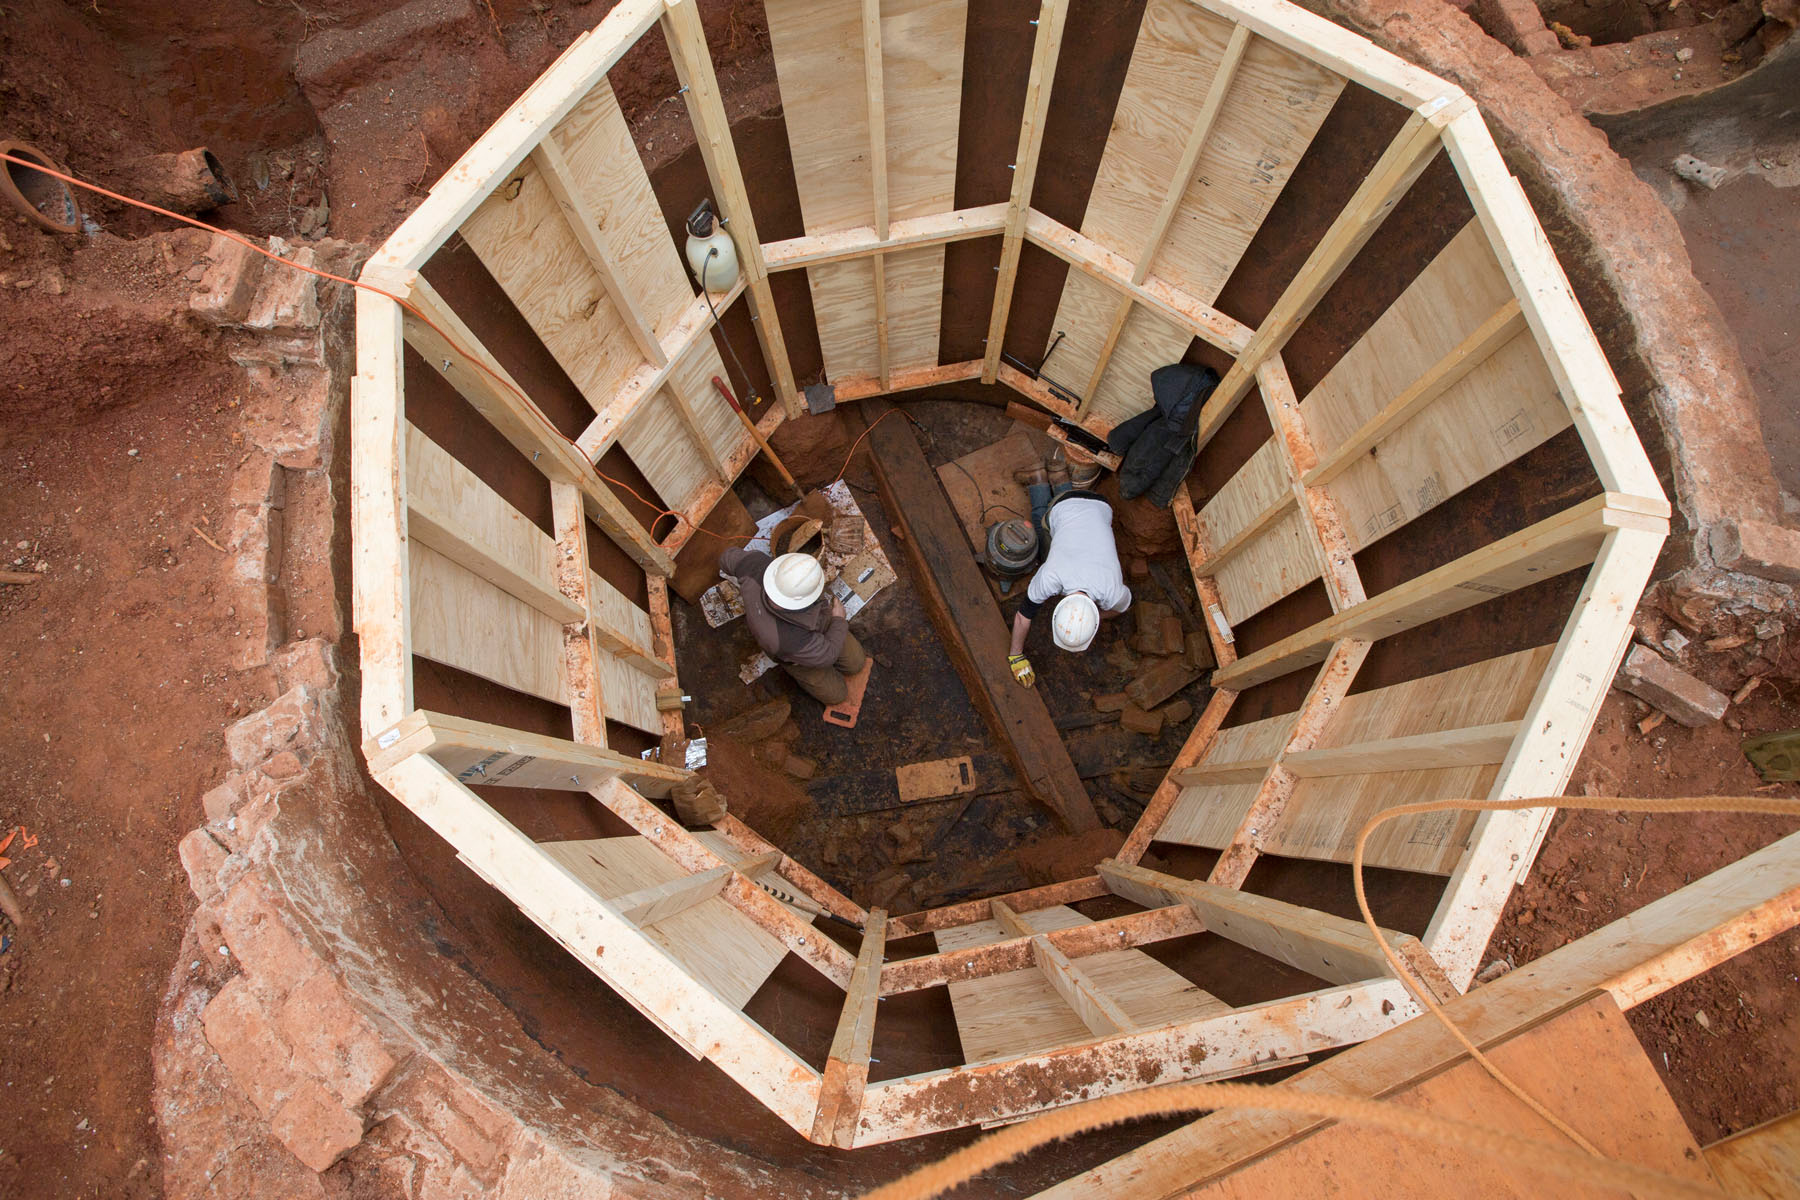 Steve Thompson (left) and Travis Maslen work in a cistern